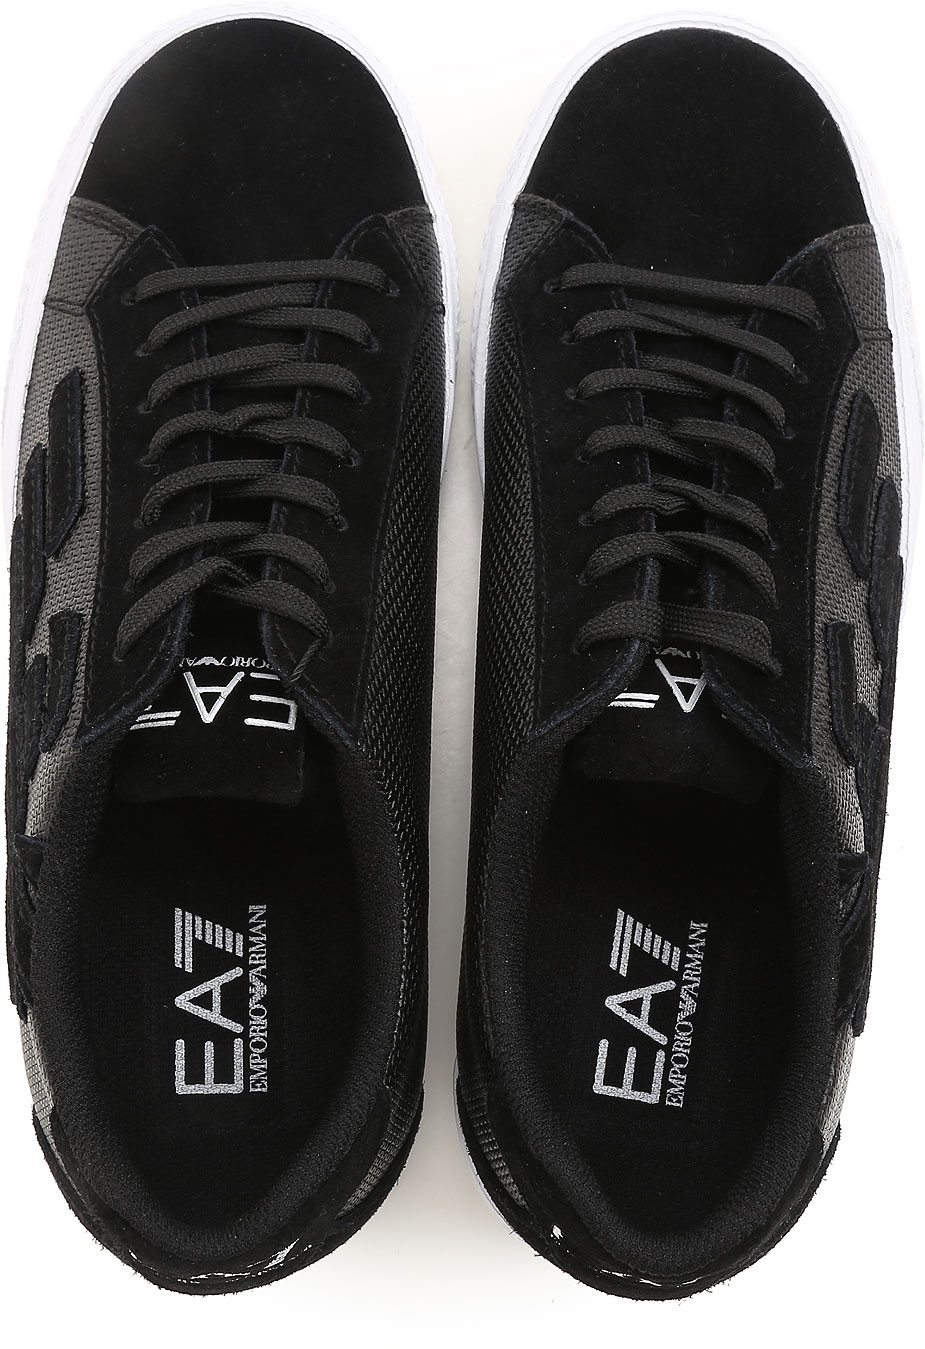 Womens Shoes Emporio Armani, Style code: 248008-7a299-00020